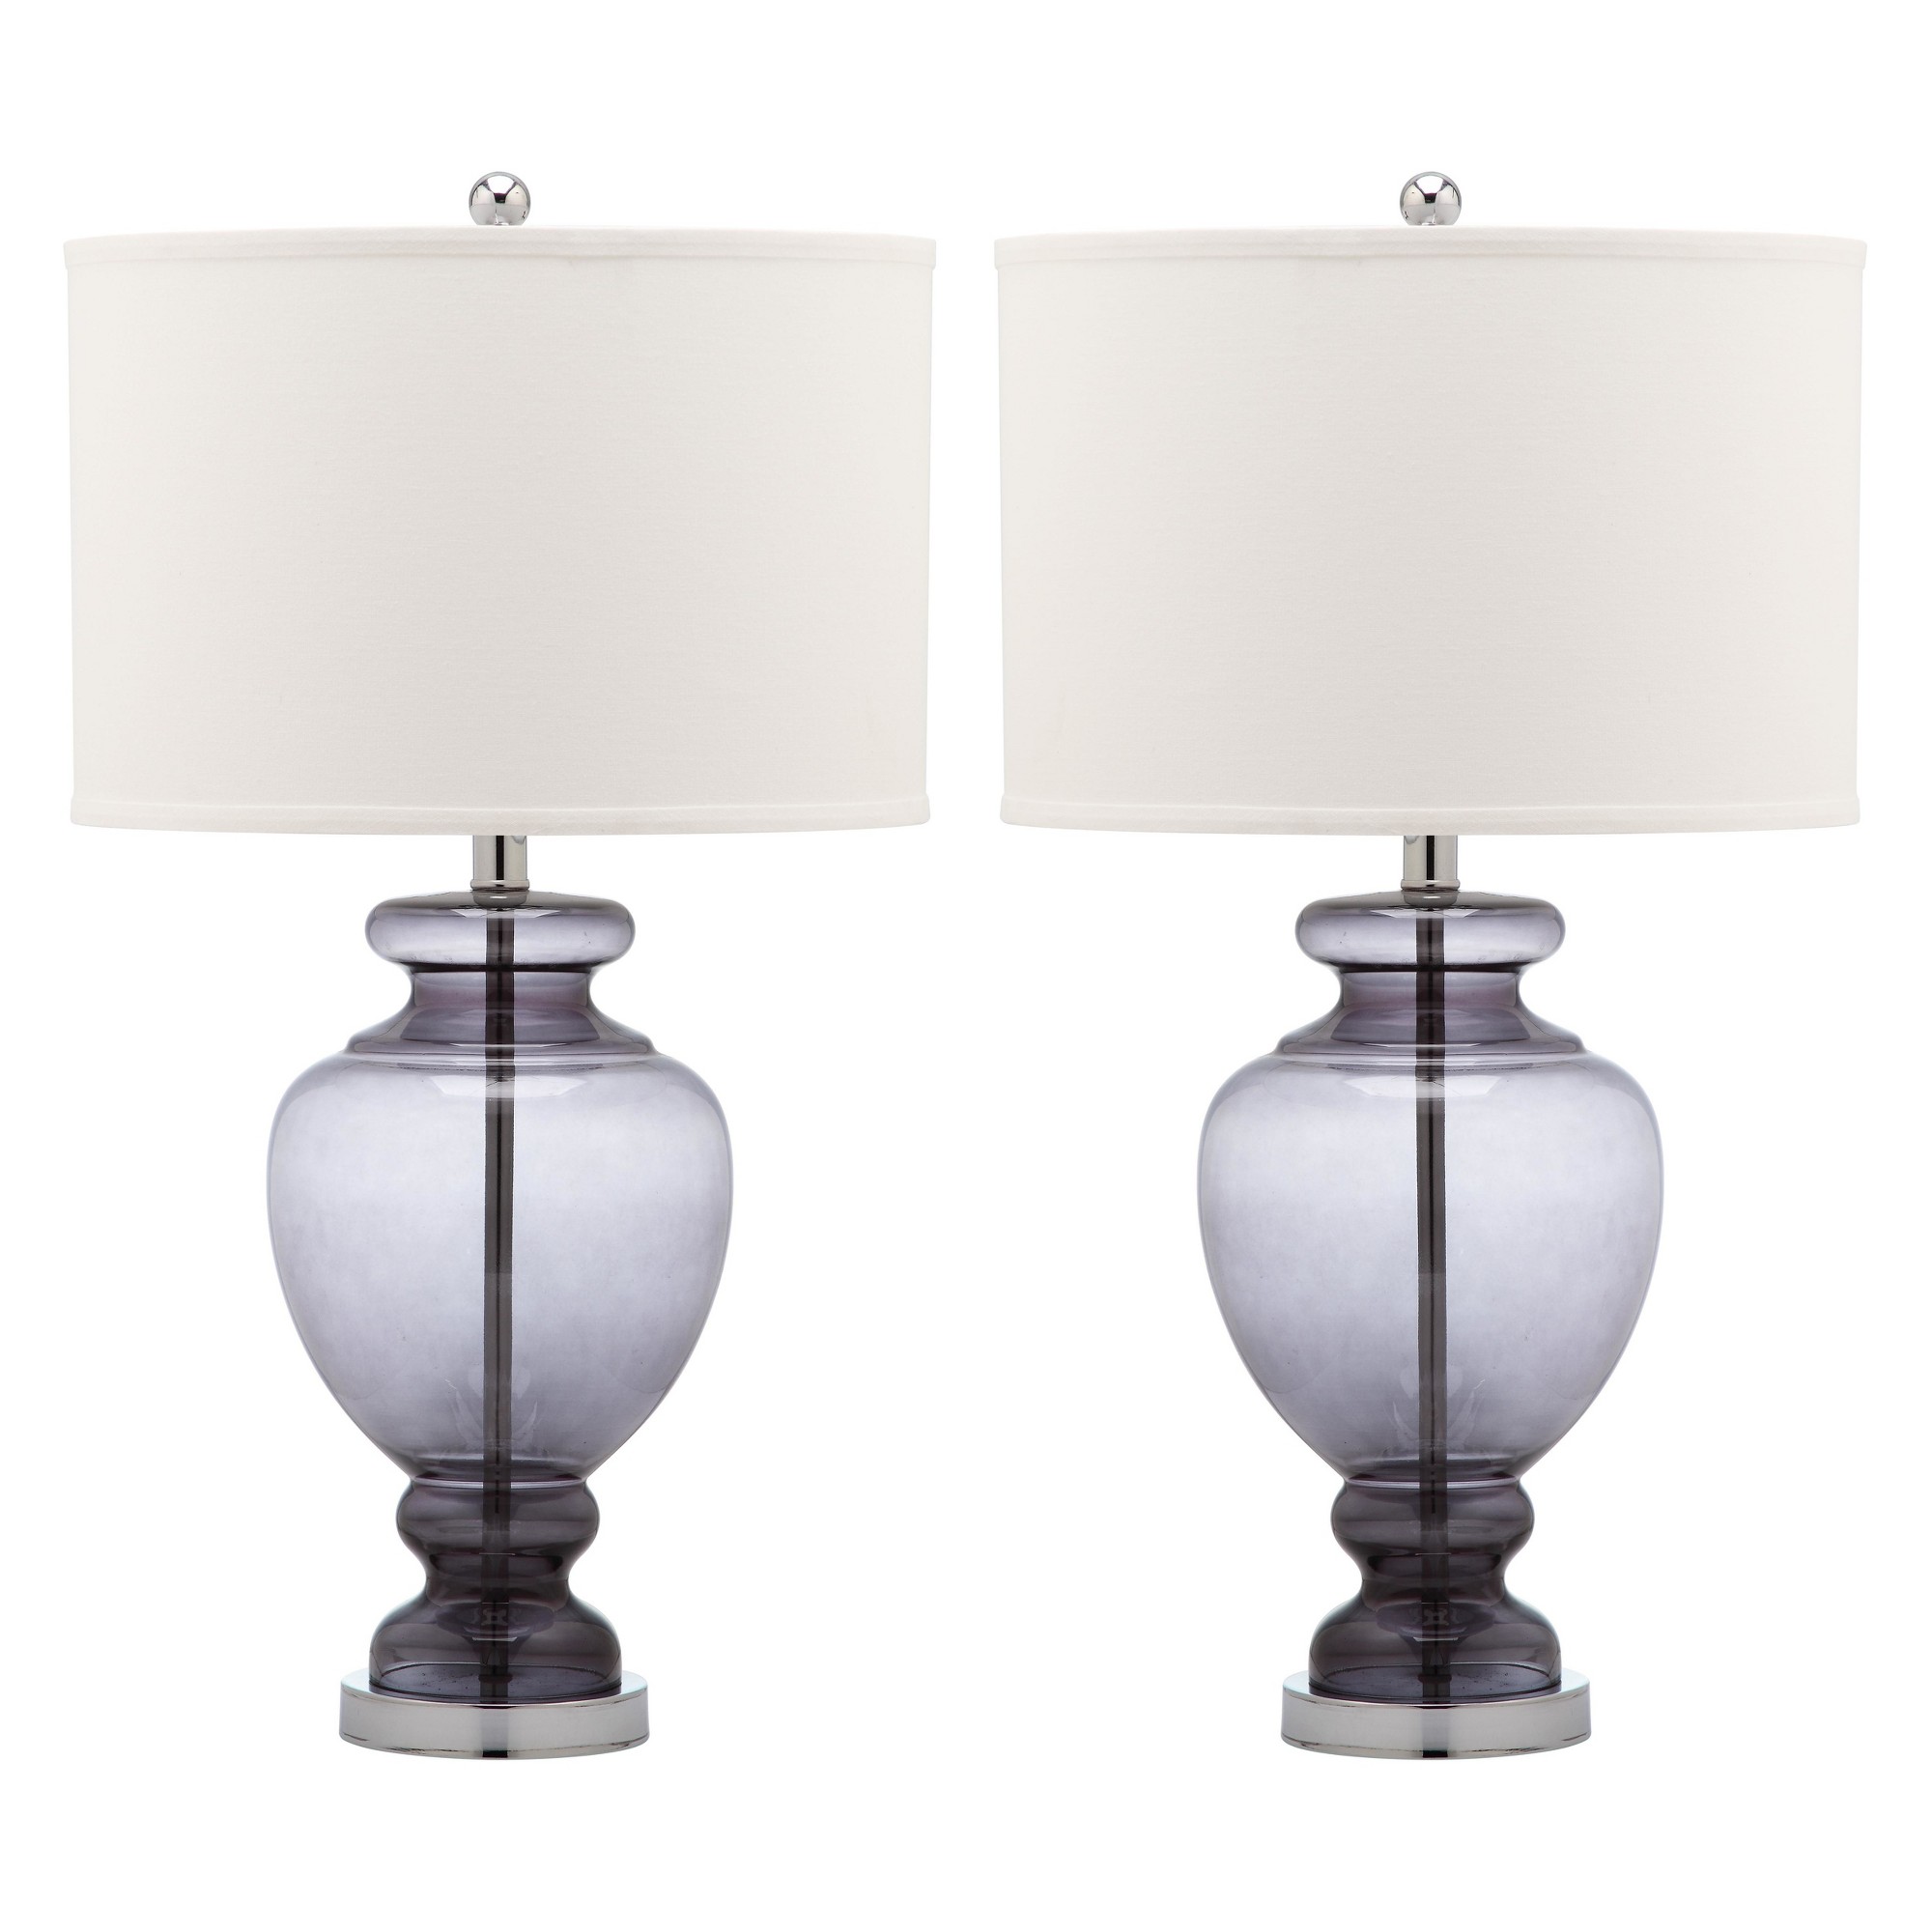 Clear Glass Table Lamp - Gray (Set of 2) - Safavieh , Clear/White